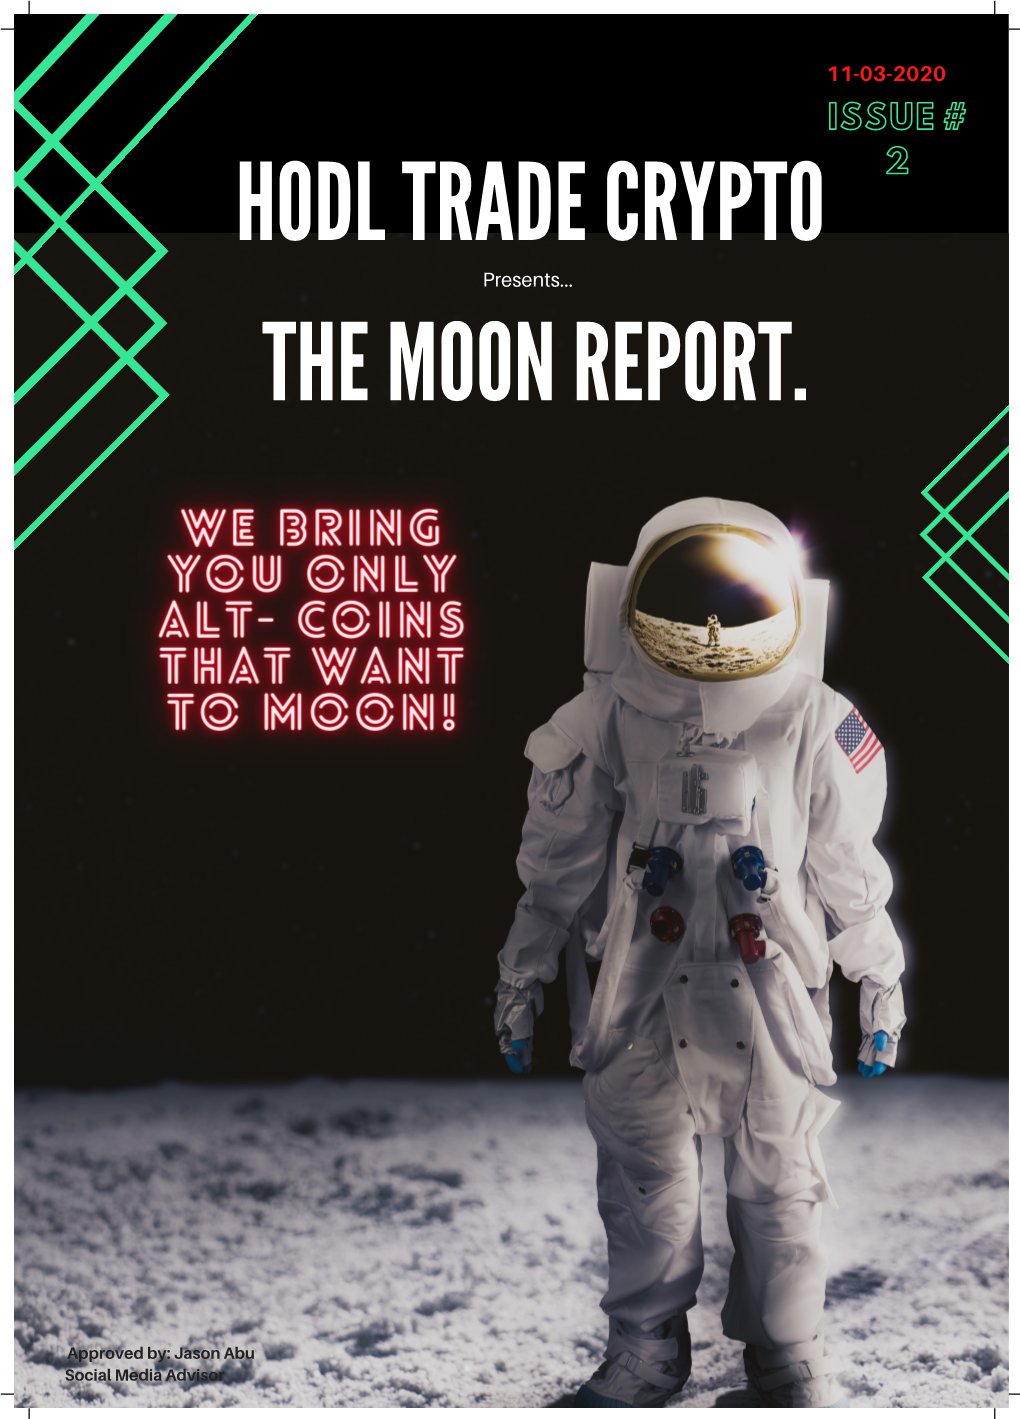 The Moon Report Hodl Tr Ade Crypto